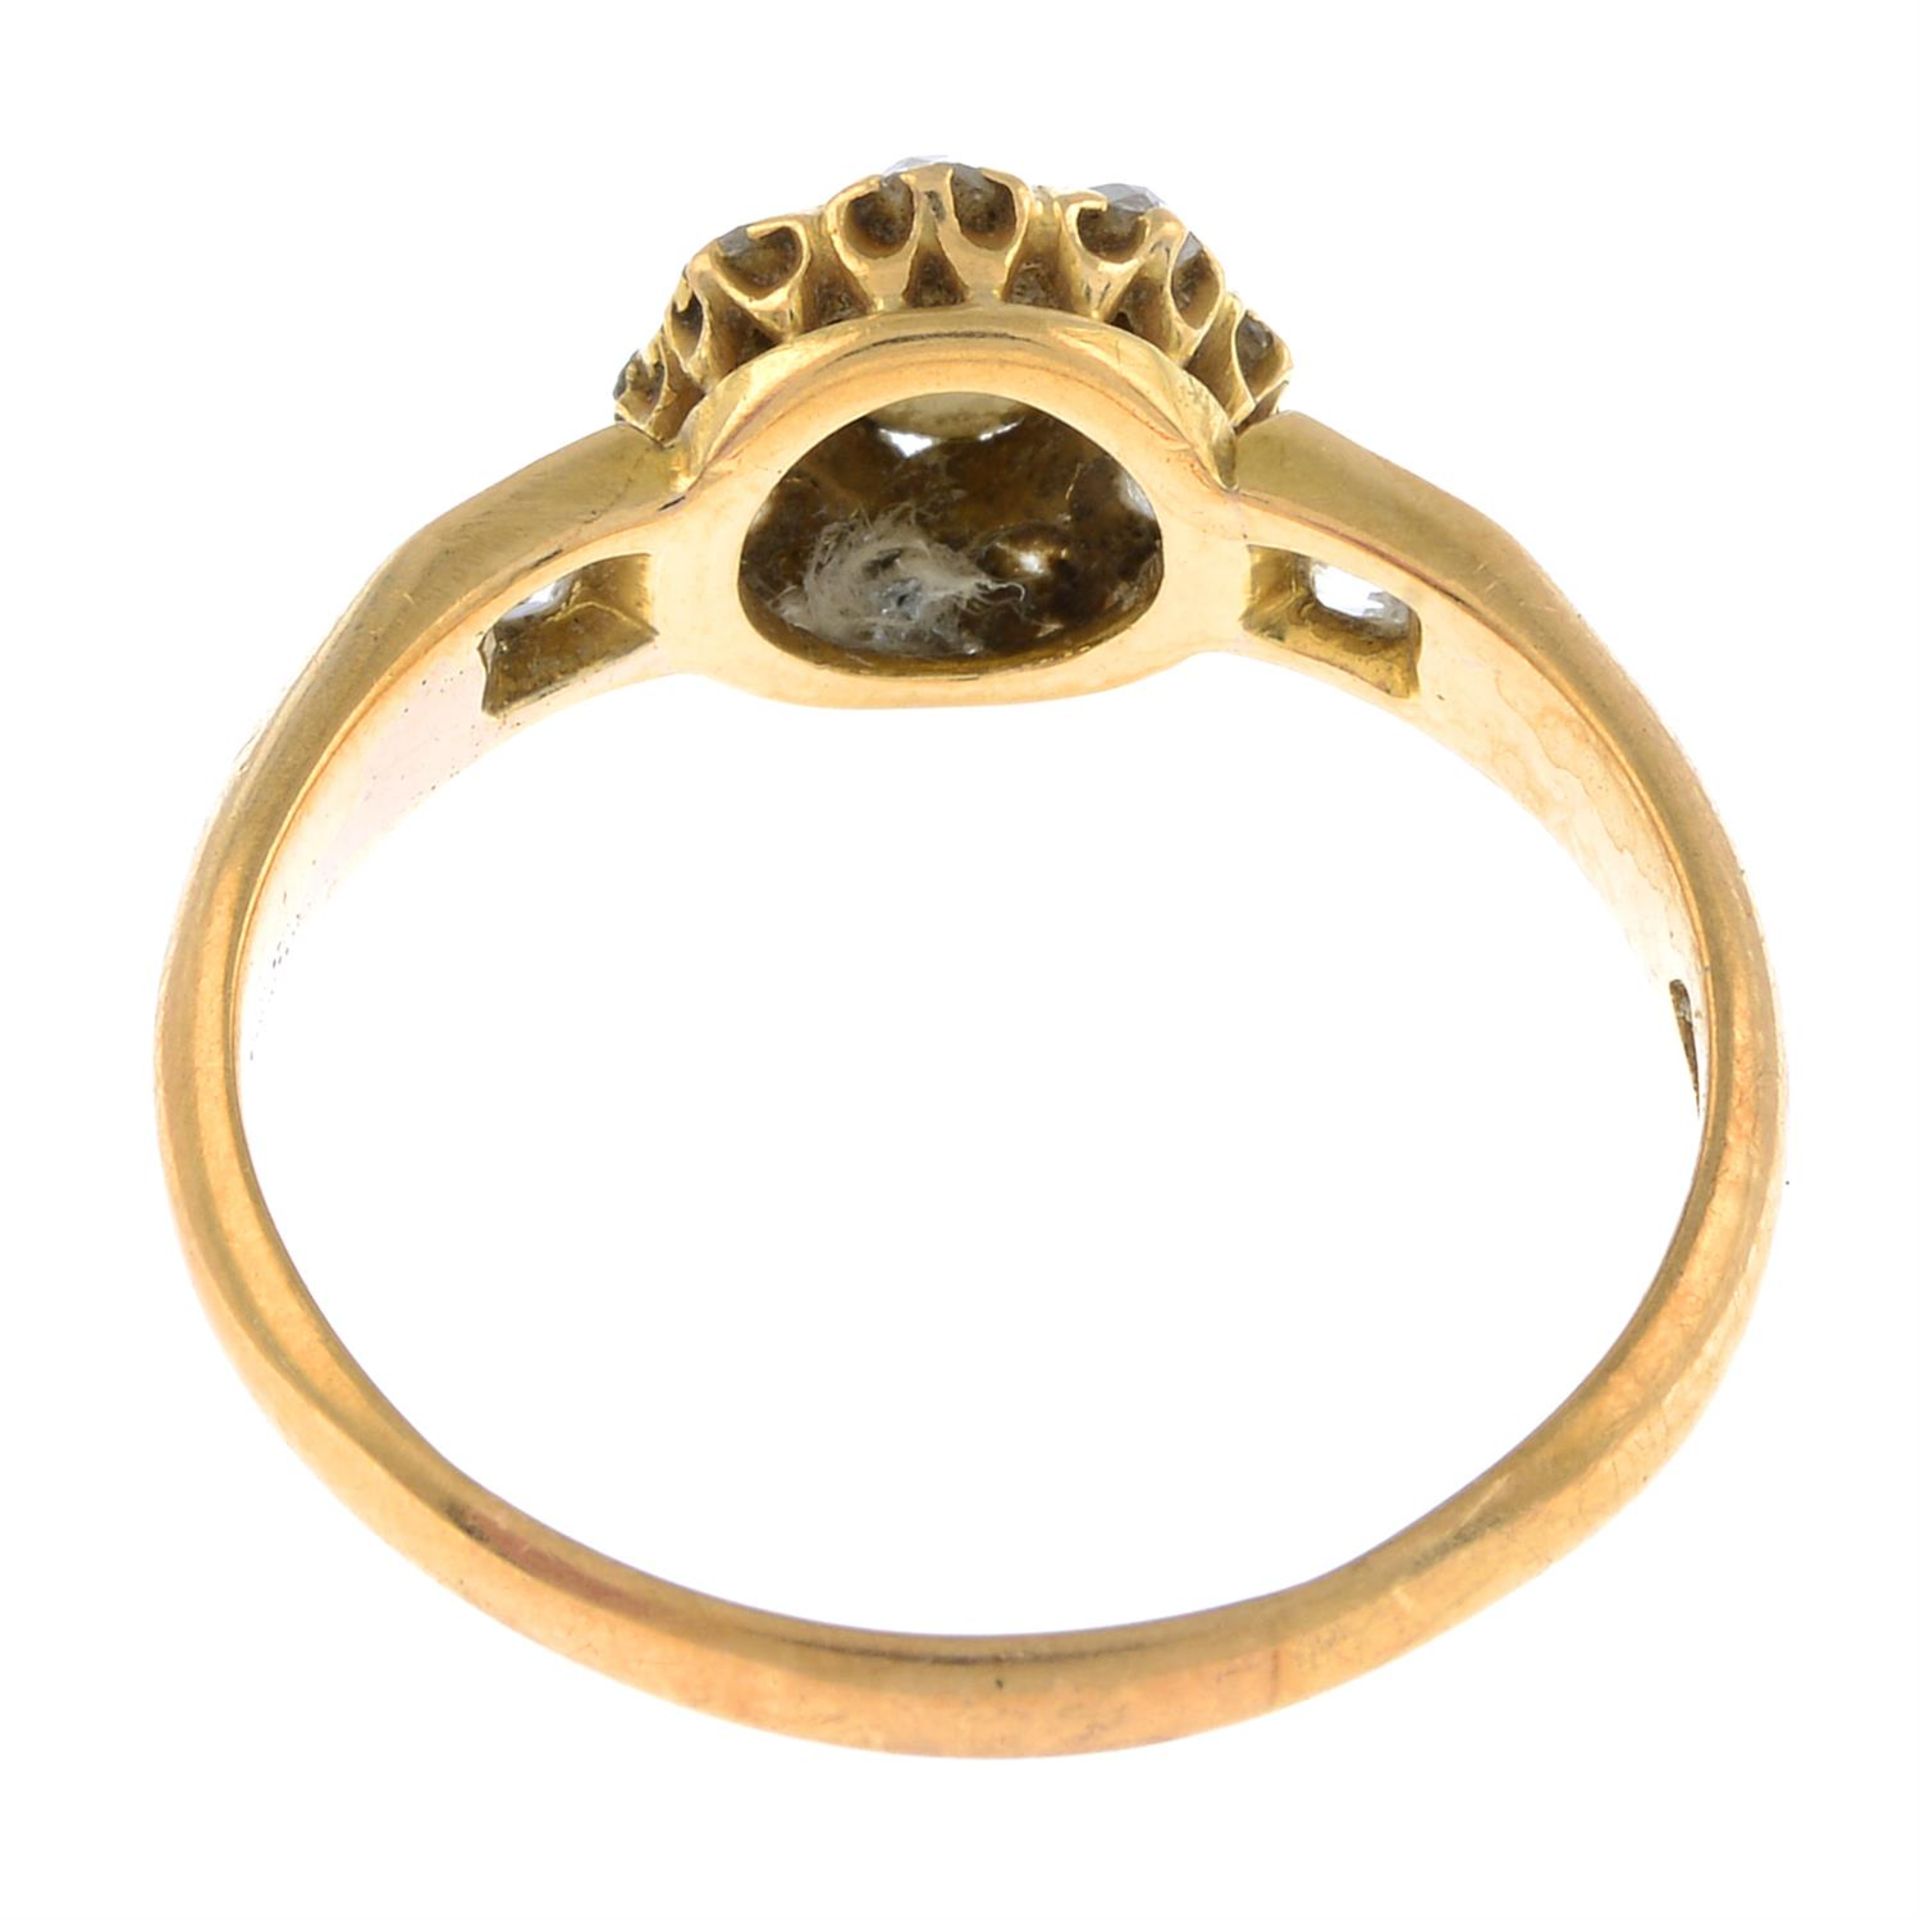 Early 20th century 18ct gold cat's-eye chrysoberyl & diamond cluster ring - Image 2 of 2